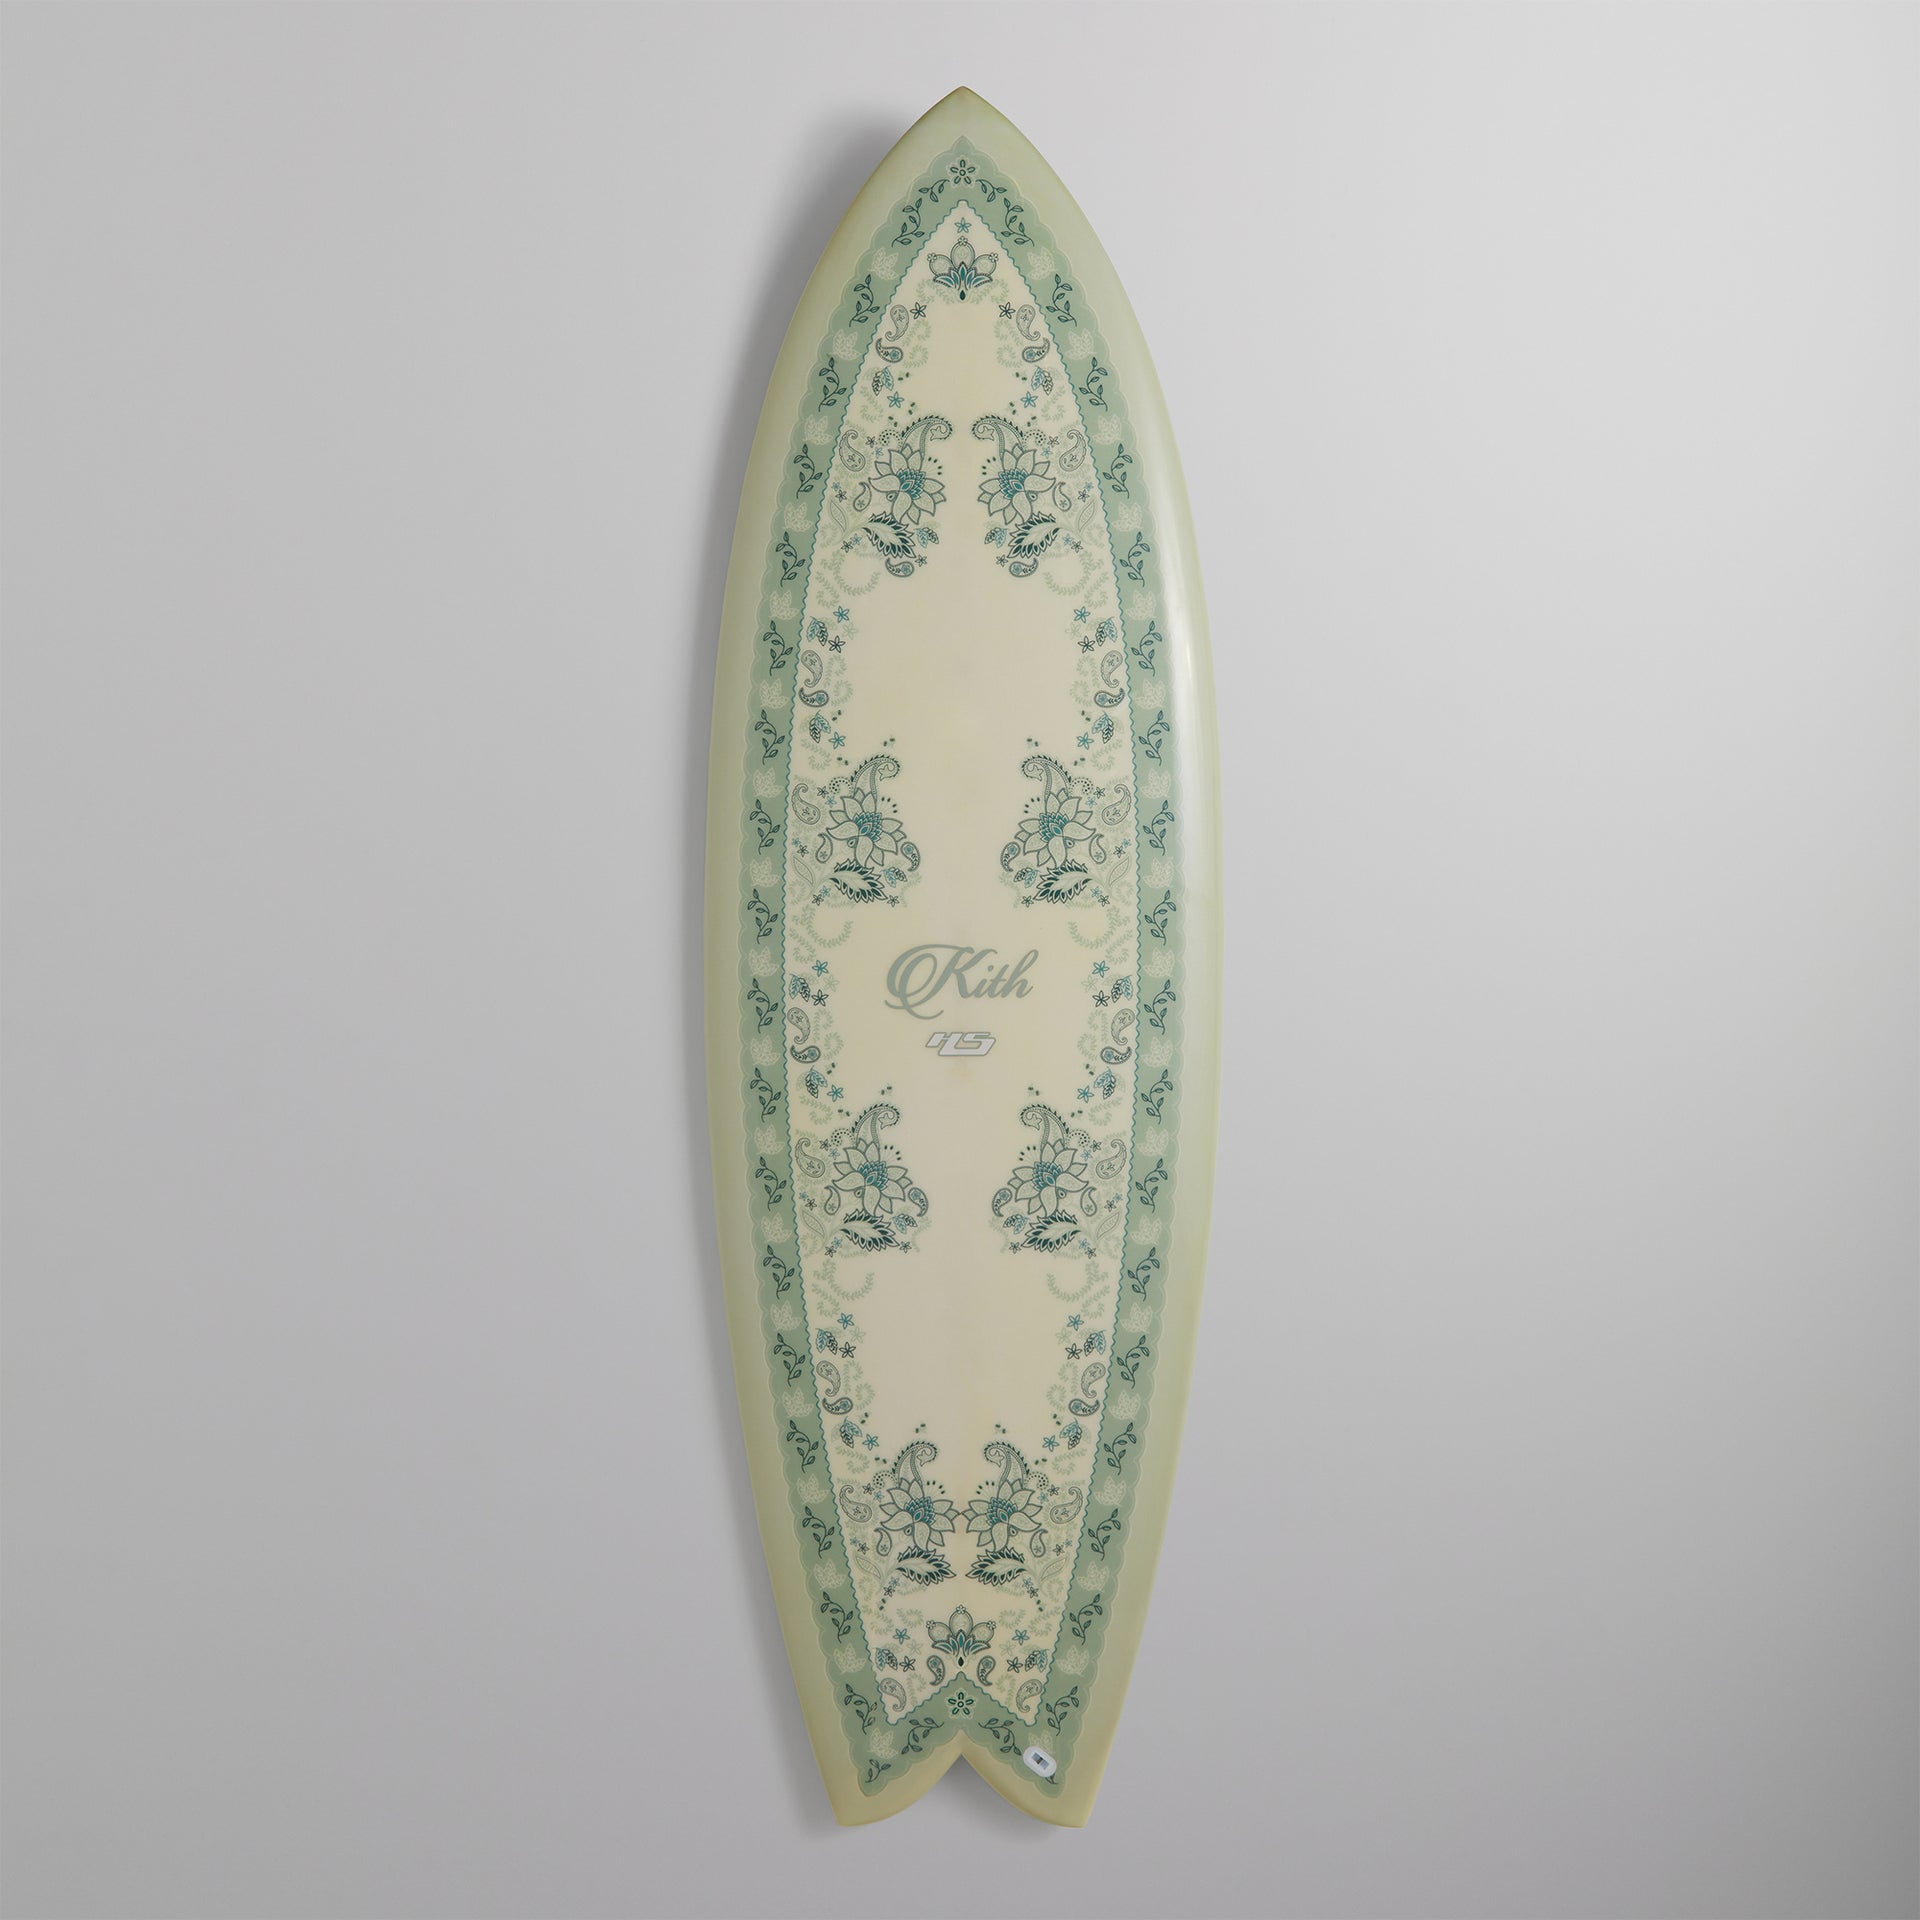 Kith for Haydenshapes Twin Surfboard - Paisley